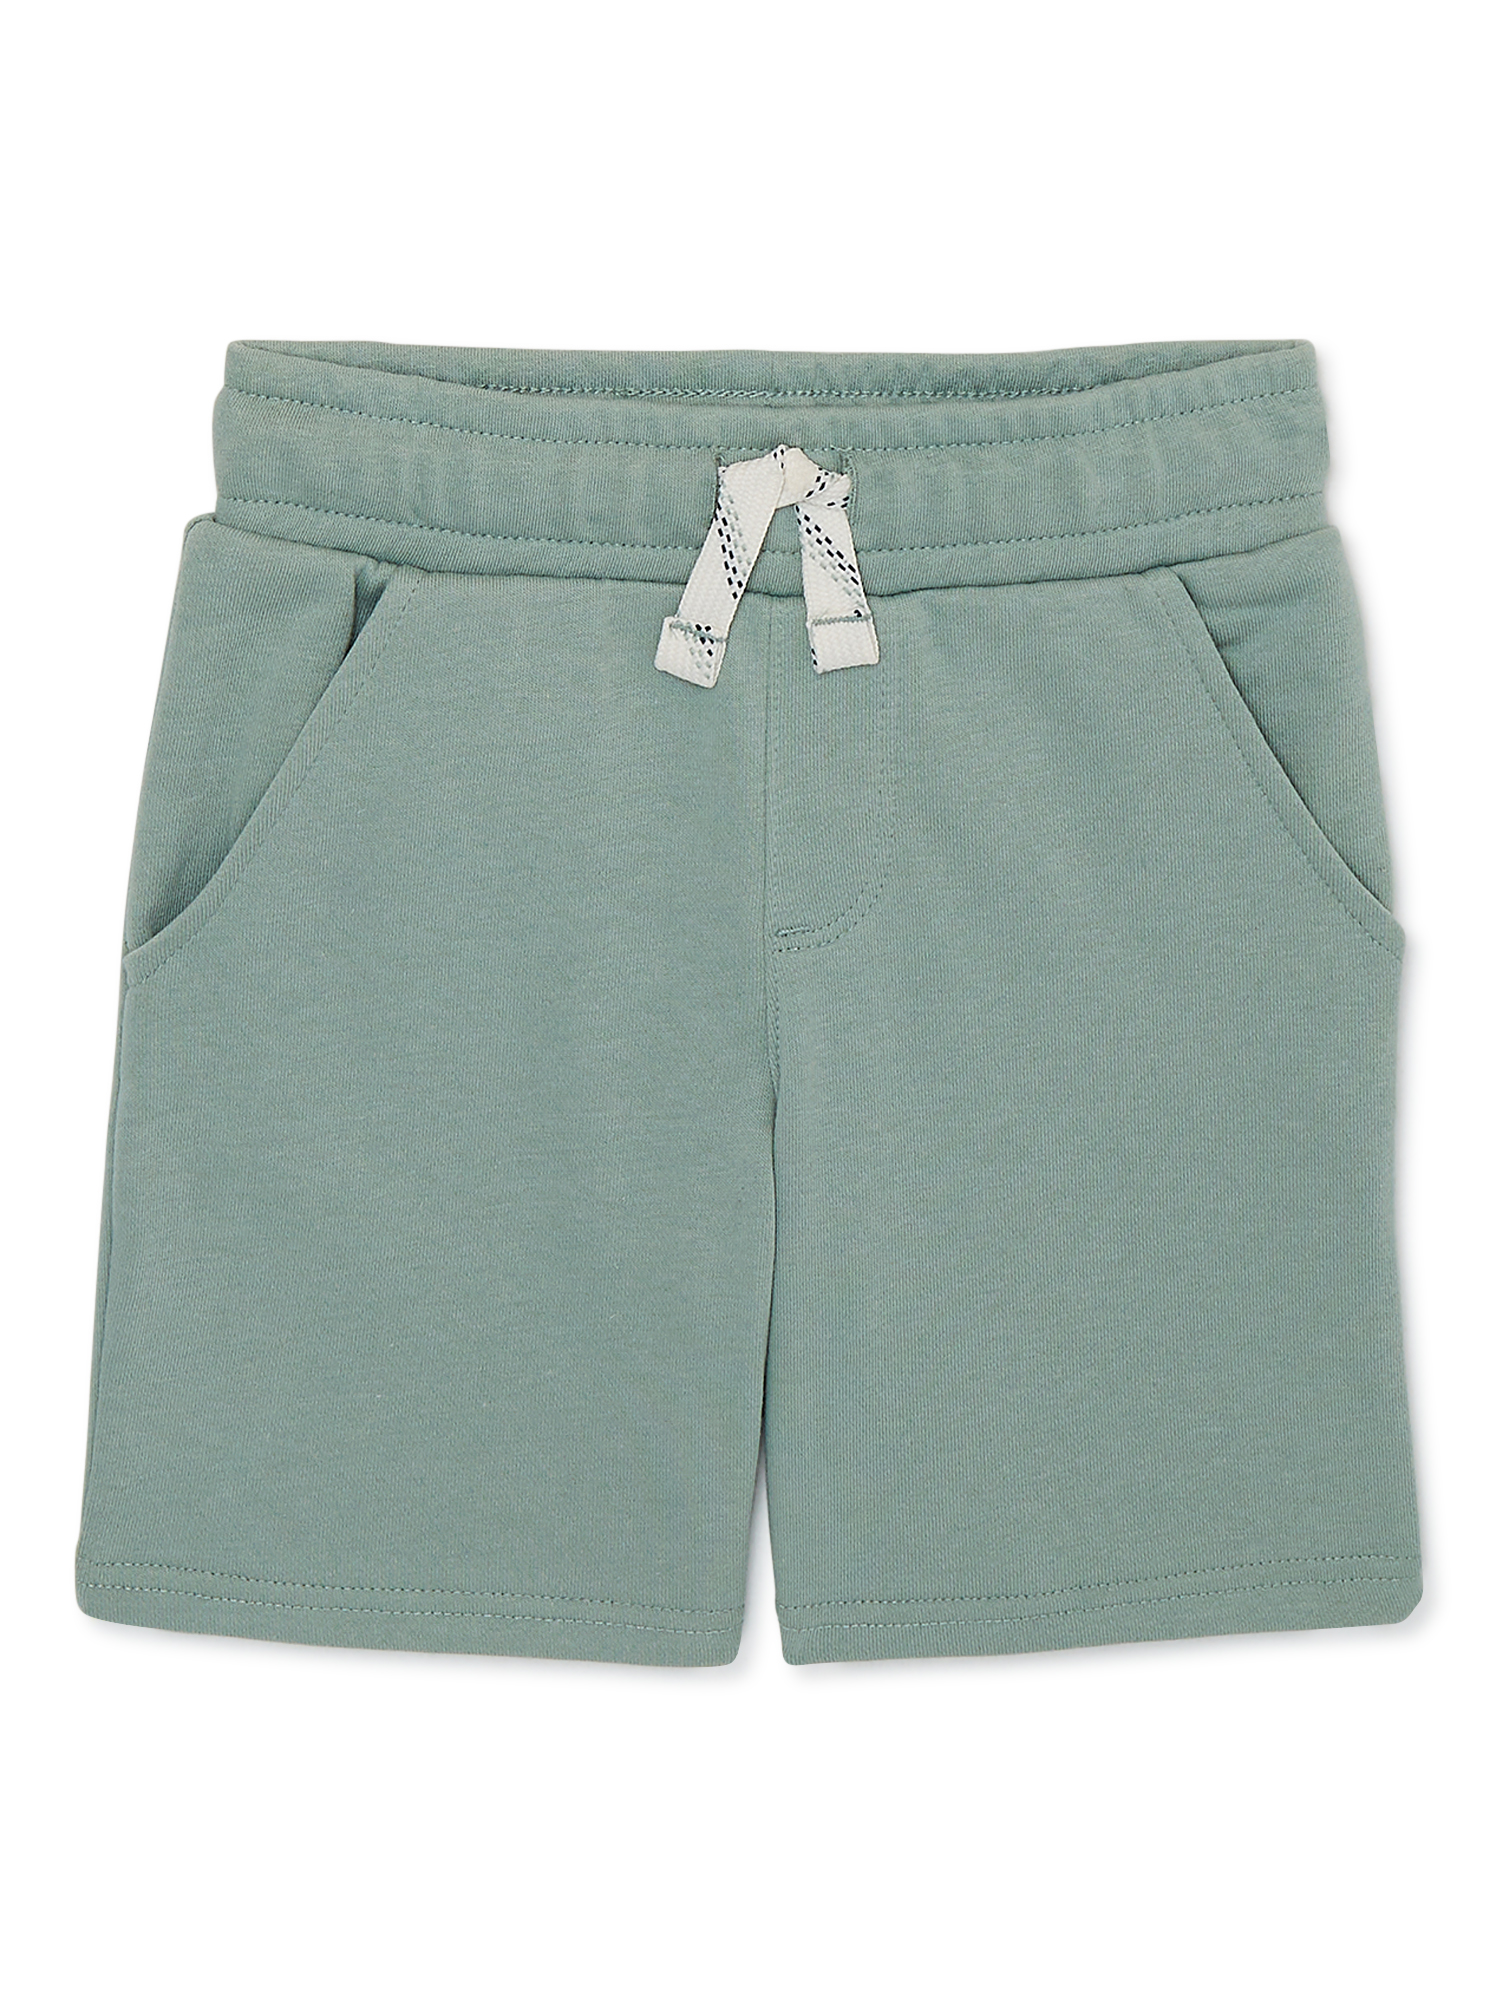 365 Kids Boys French Terry Shorts, Sizes 4-10 - image 1 of 4